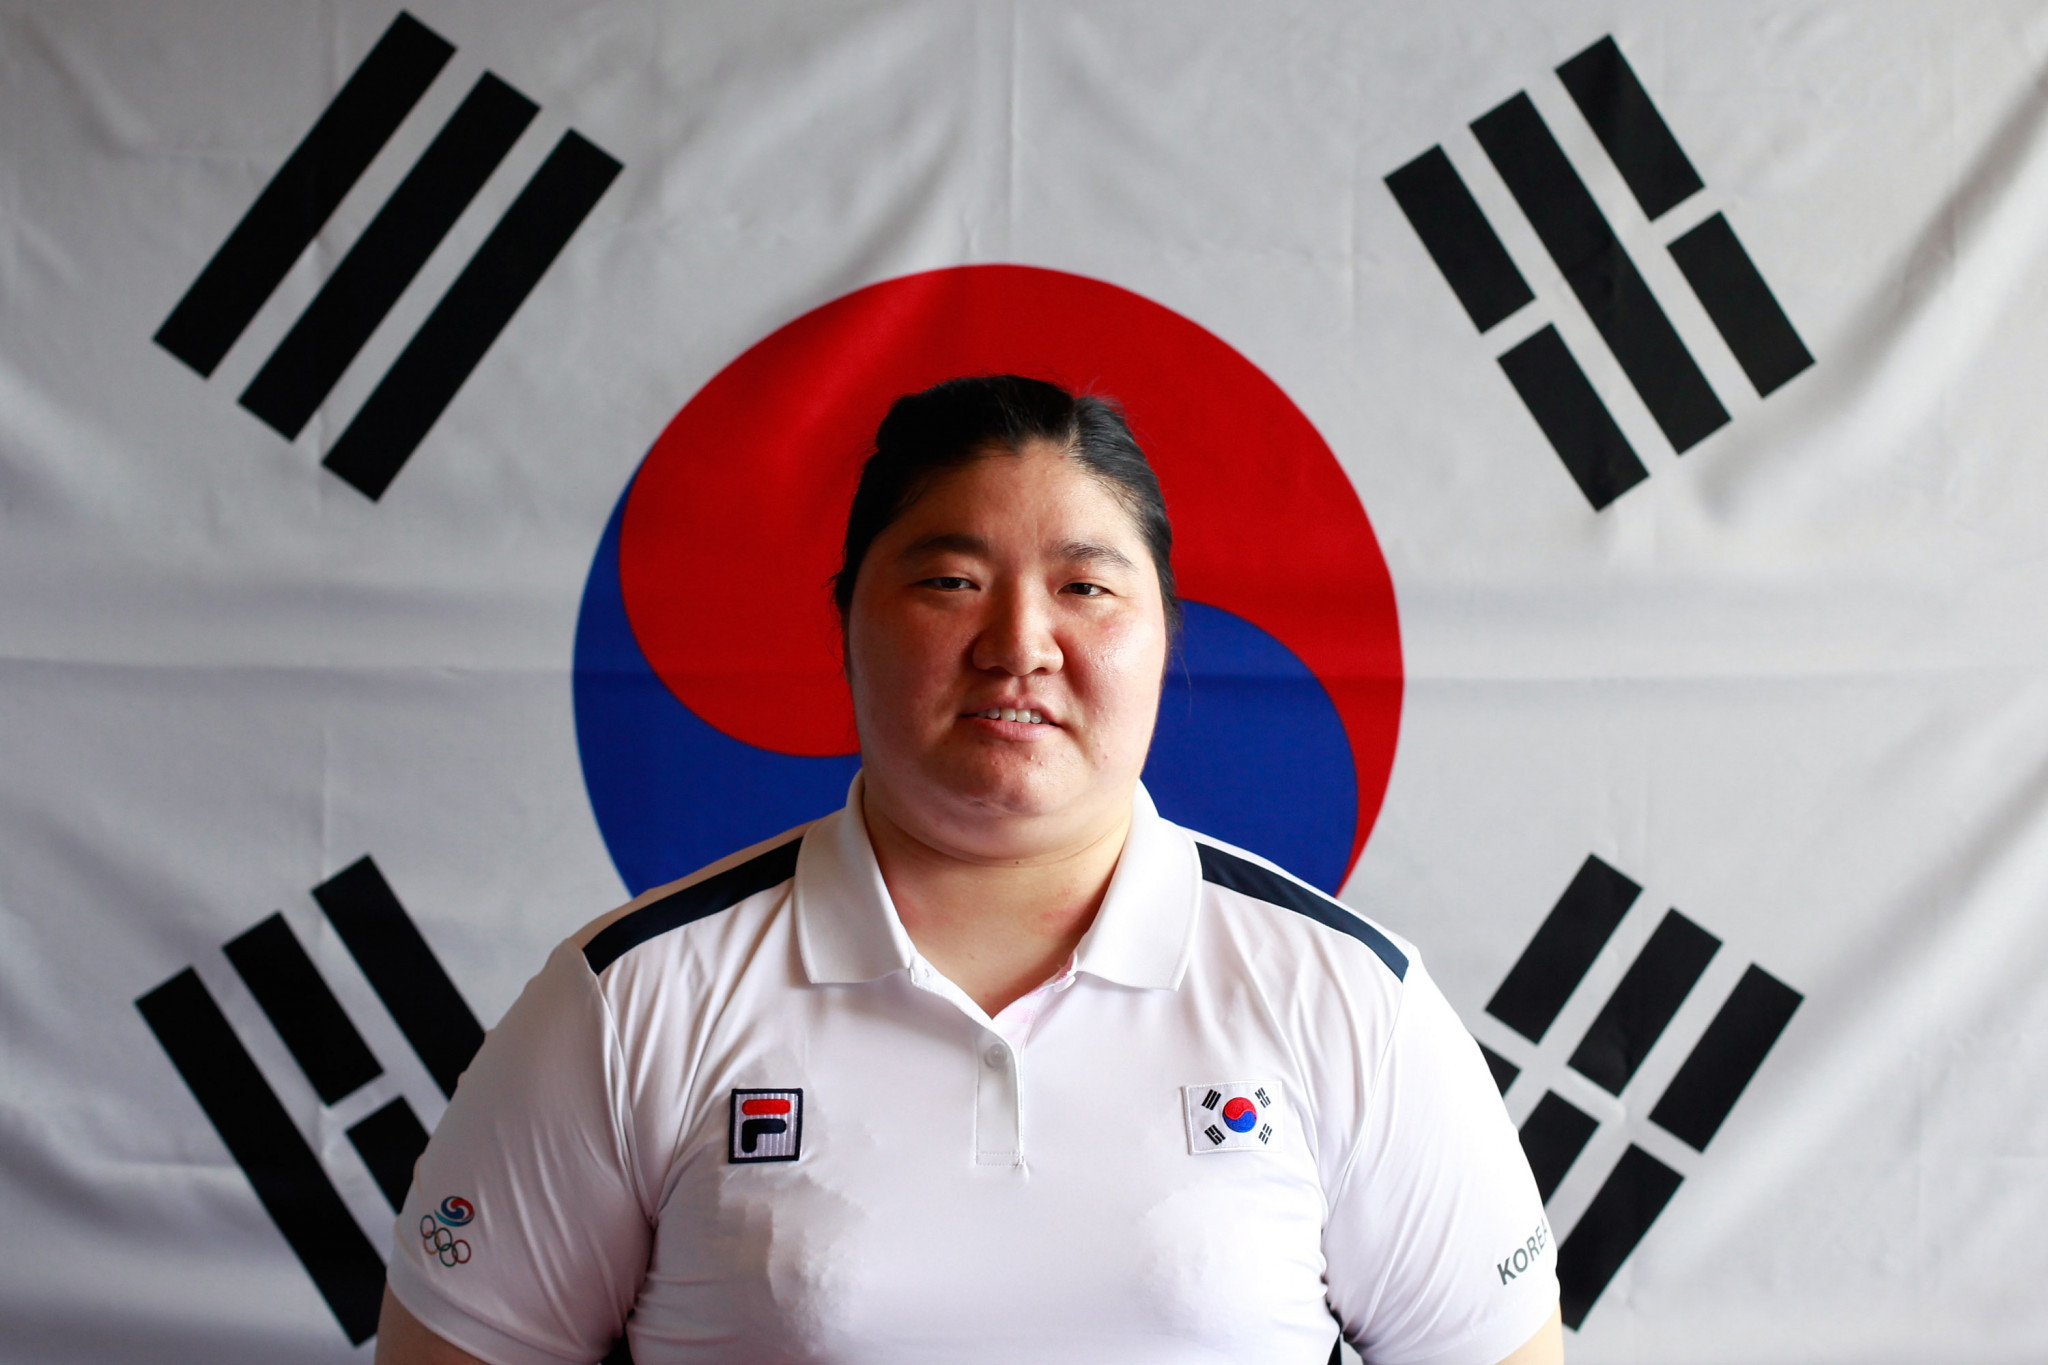 South Korean Olympic champion Jang appointed to Ministry of Culture, Sports and Tourism